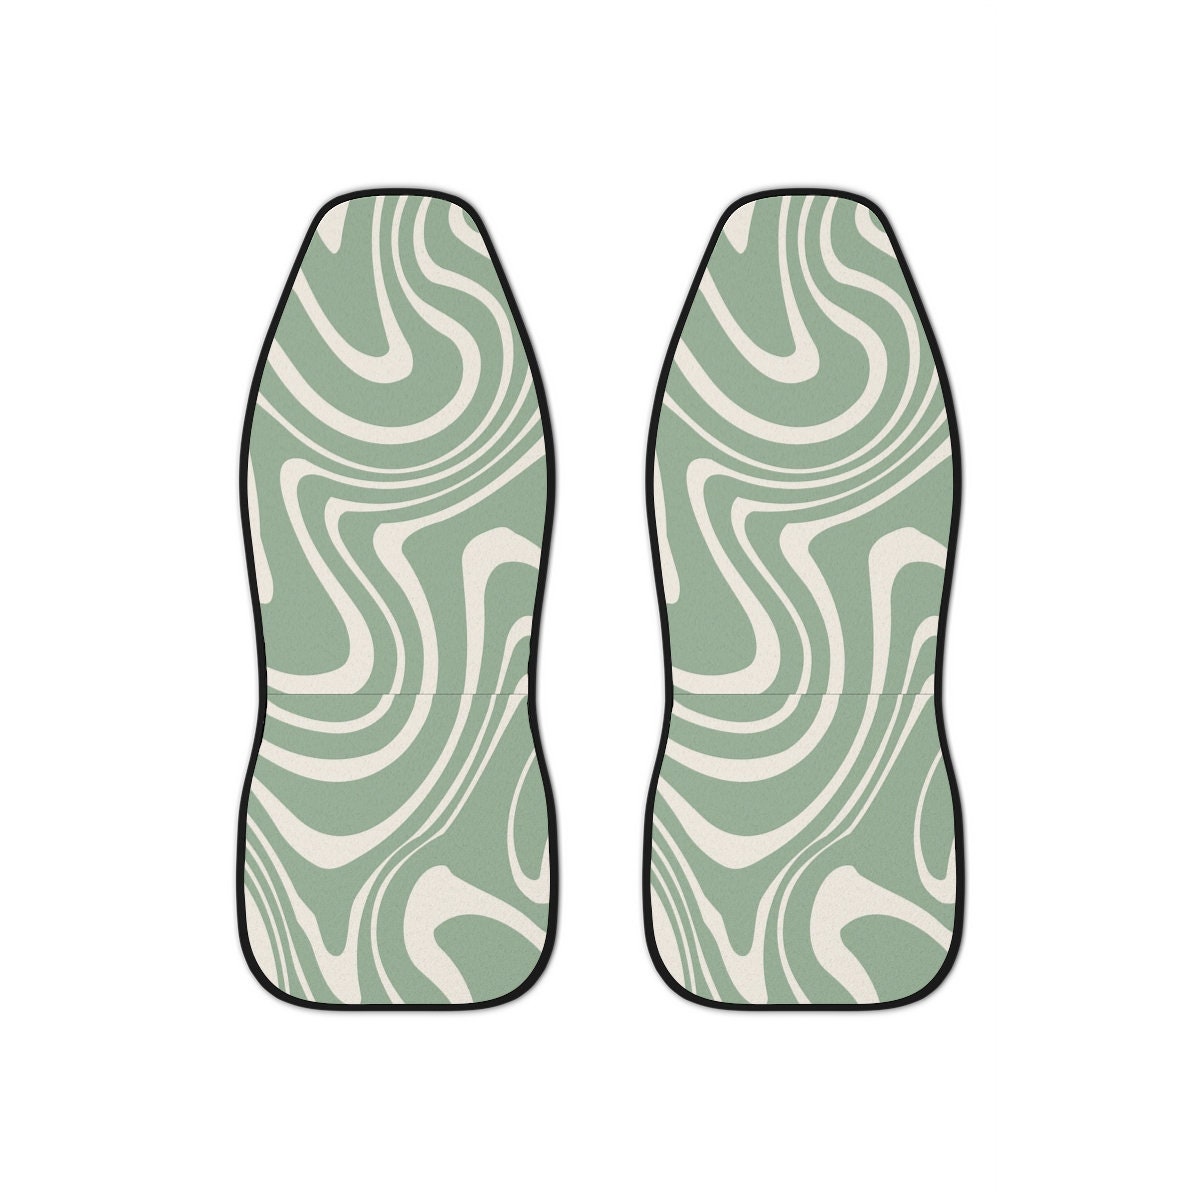 Discover Sage green and cream retro groovy car seat covers